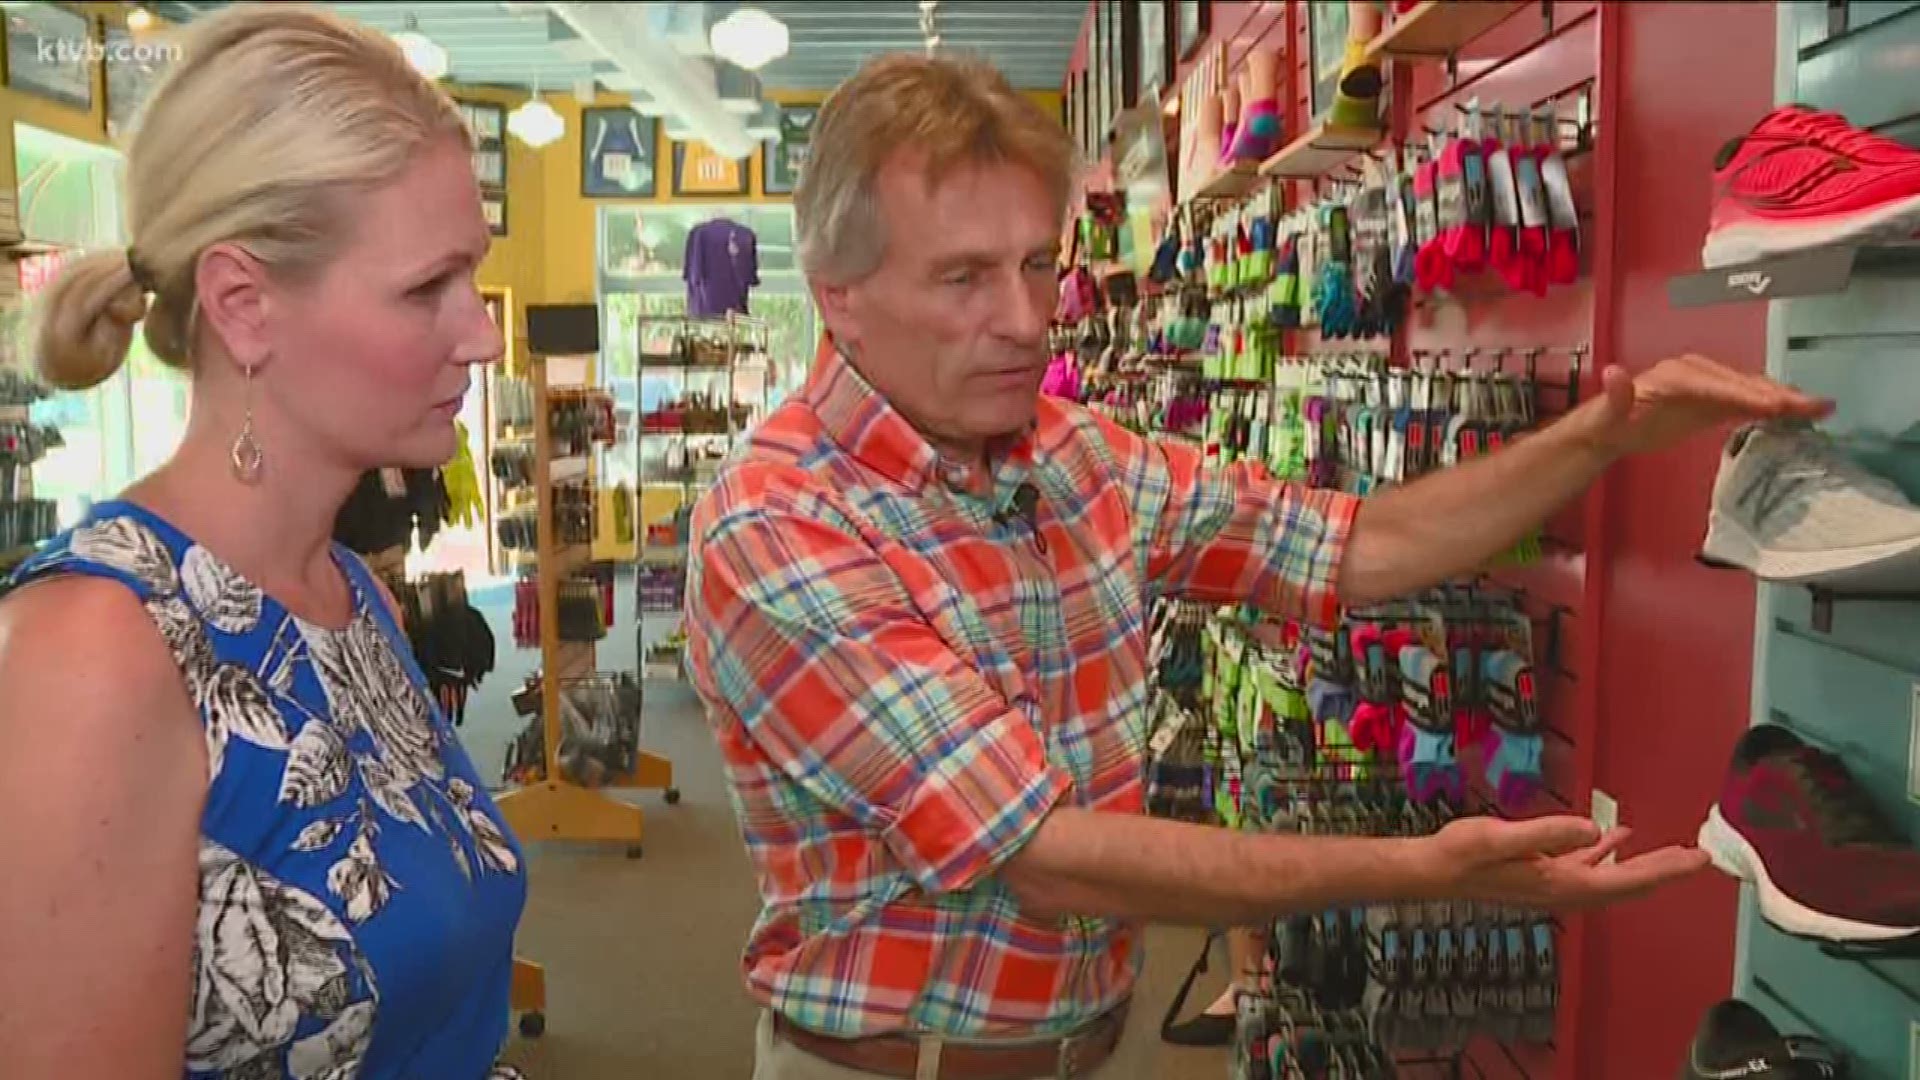 The Boise store has been selling running and walking shoes for 25 years.